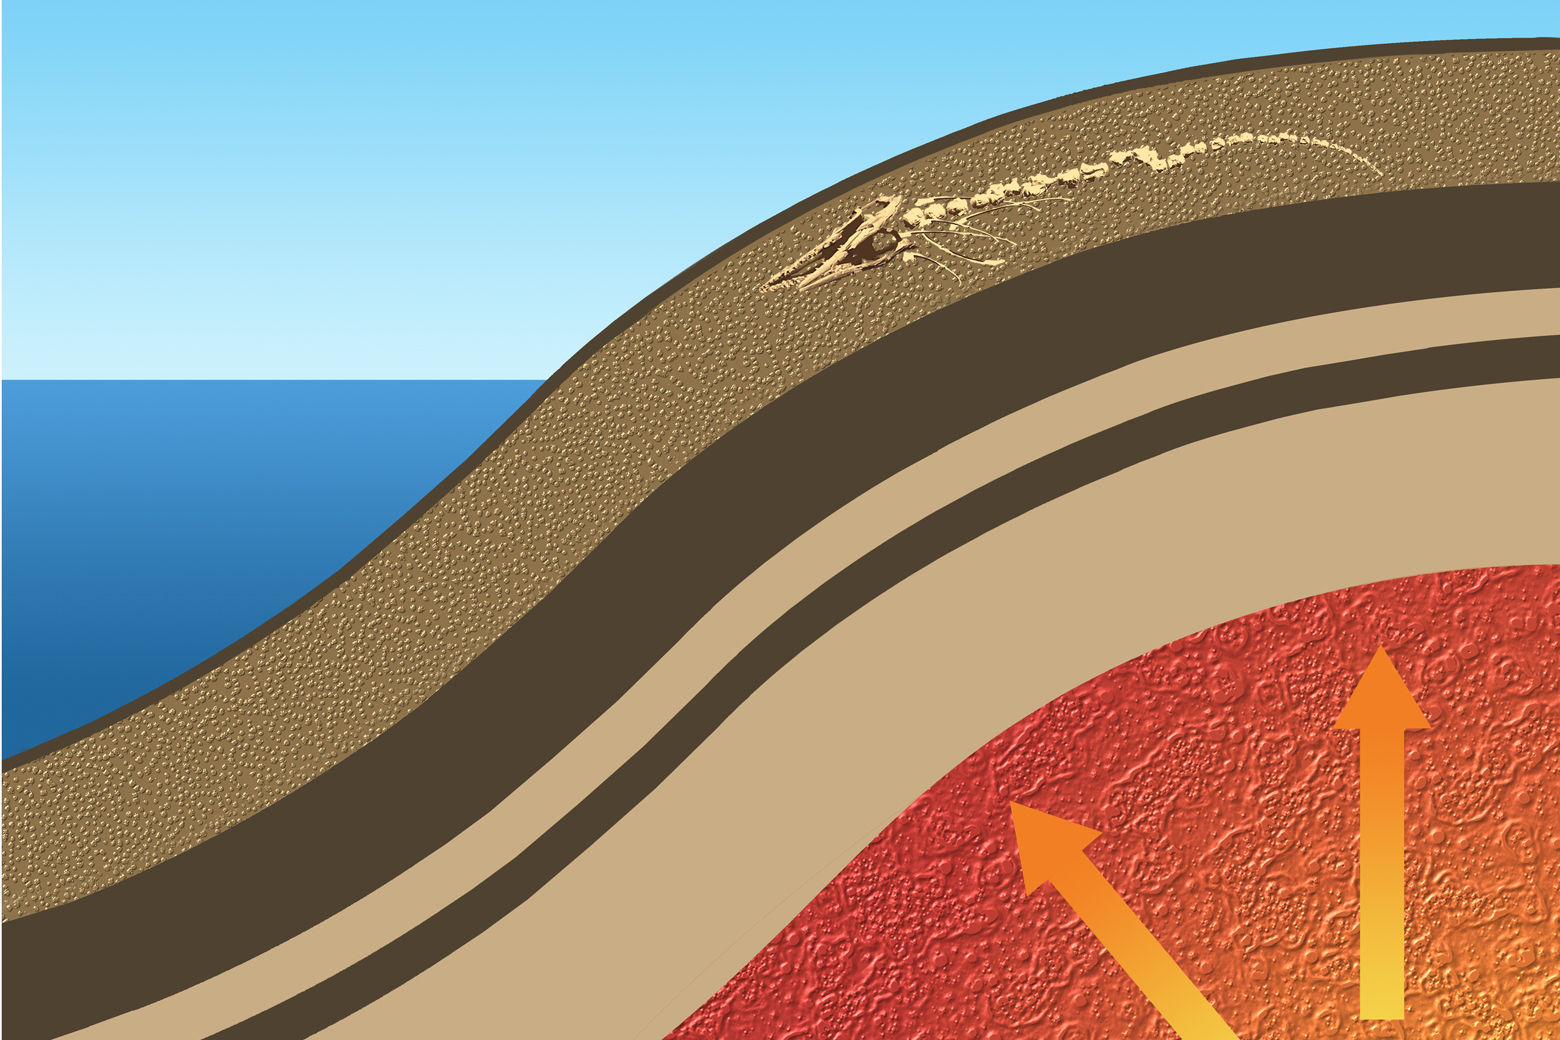 Starting about 45,000 years ago, heat flow within Earth’s mantle caused the crust to bulge in a process called dynamic uplift. Here along Angola’s coast, the bulge lifted the ocean floor hundreds of feet out of the water. (Karen Carr Studios, Inc.)